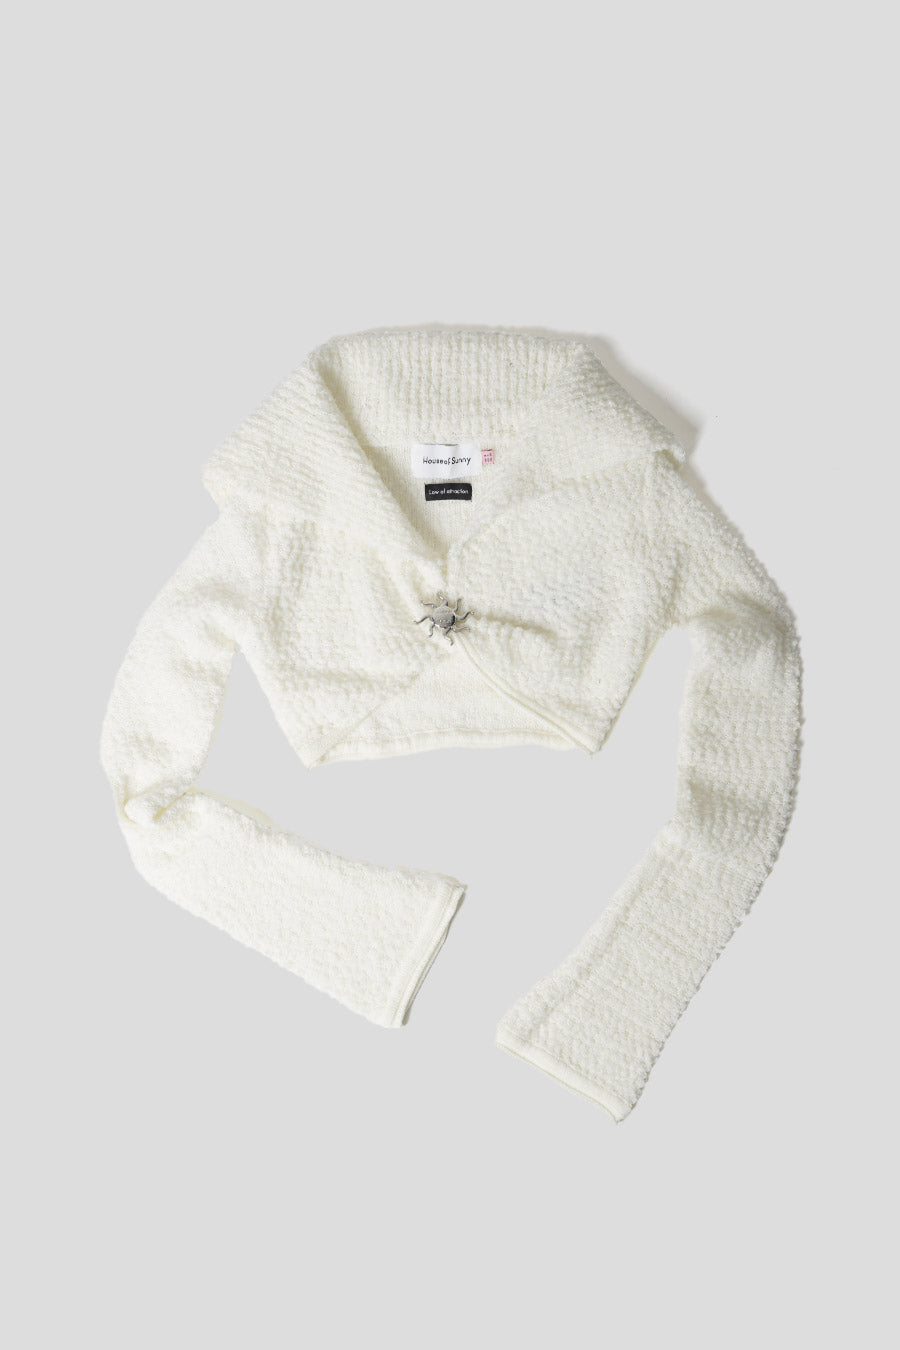 house of sunny - PORCELAIN KNITWEAR - LE LABO STORE